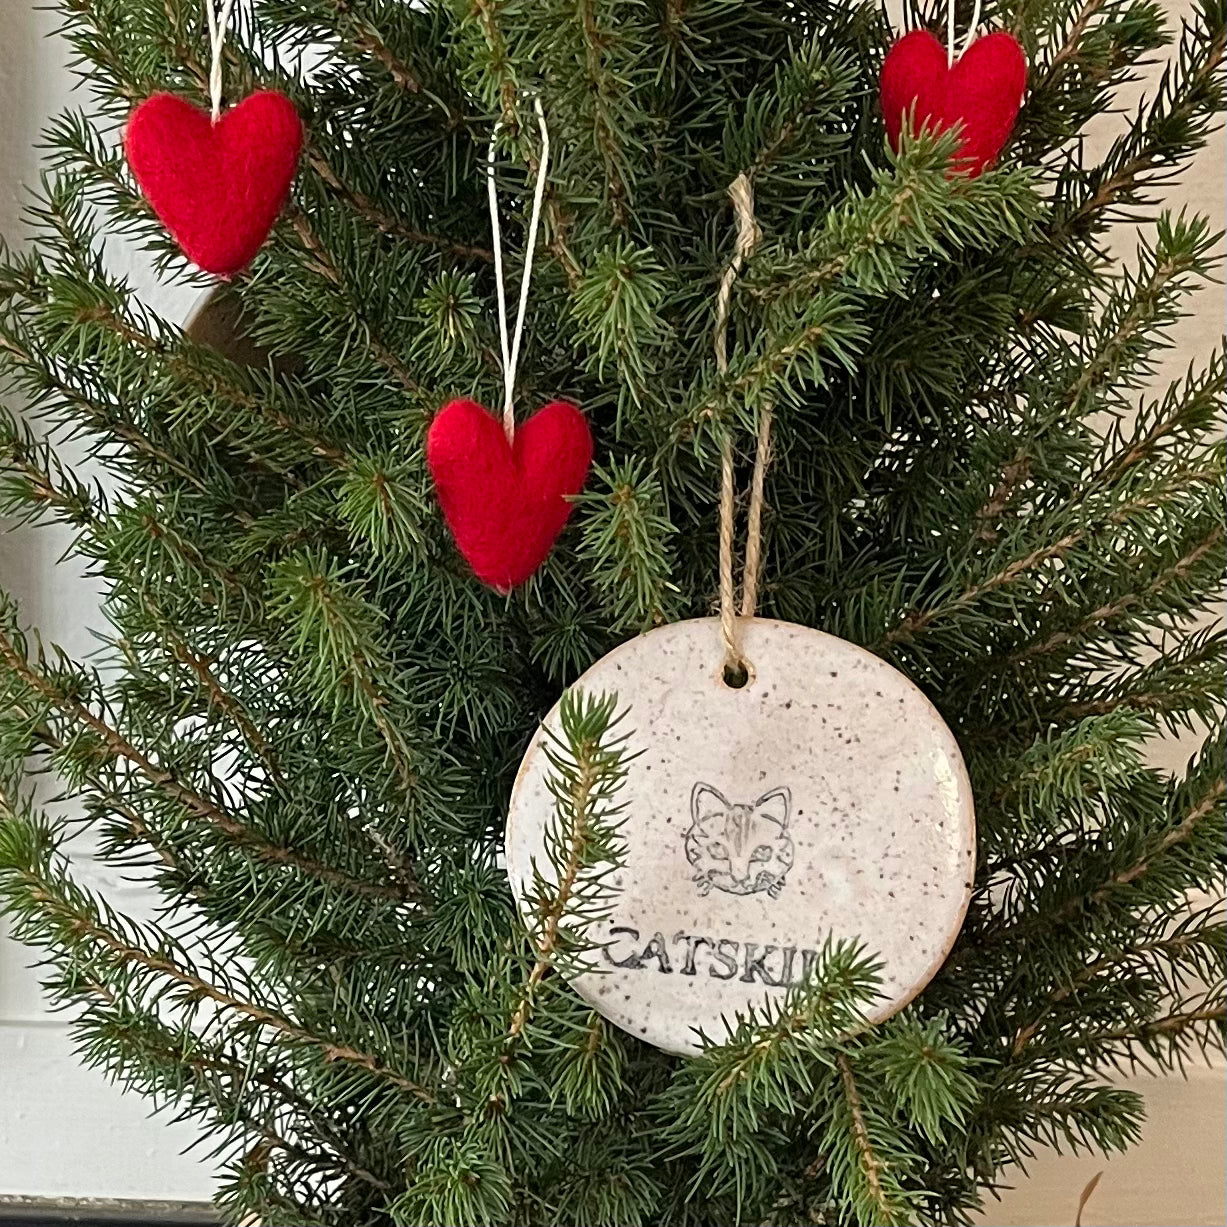 Ceramic Catskill Ornament hanging in a little tree with other ornaments